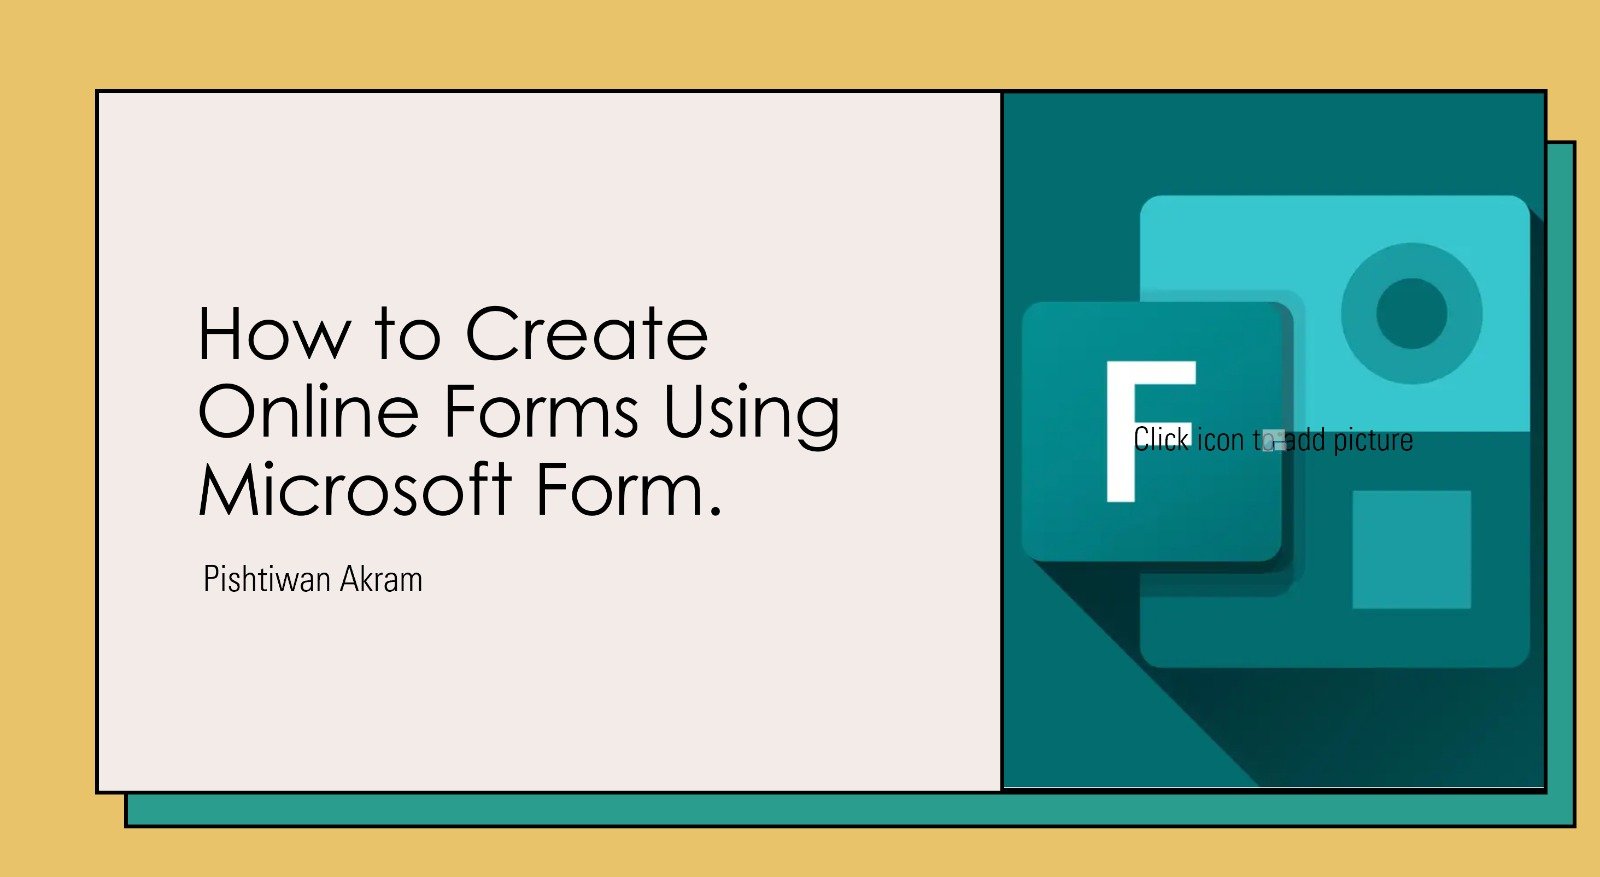 departmental-seminar-how-to-create-online-forms-using-microsoft-forms-physics-education